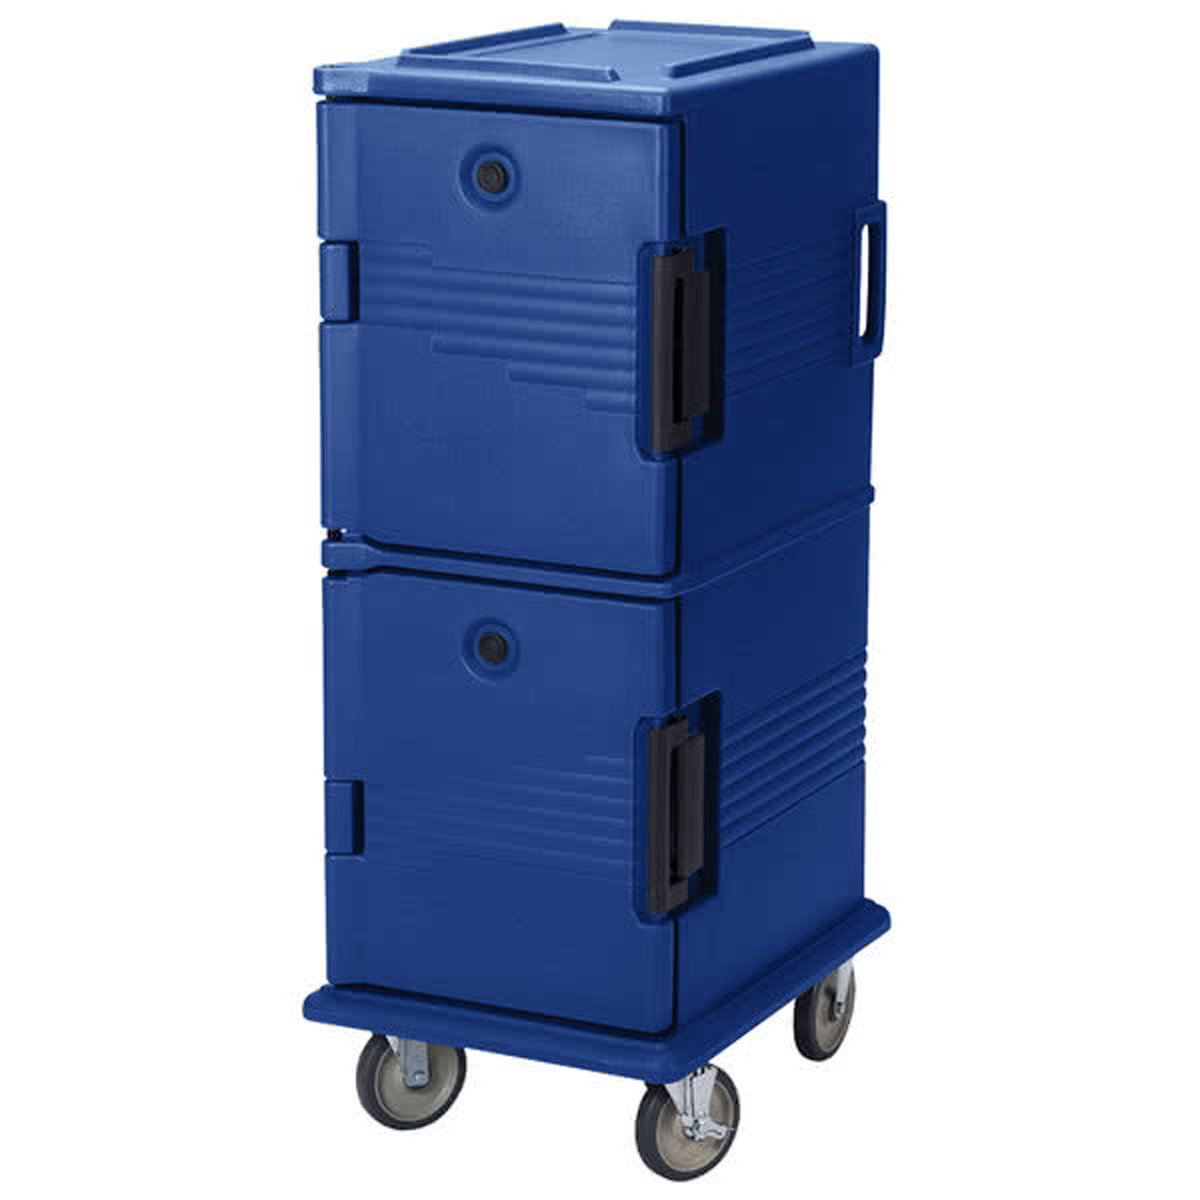 Cambro UPC800186 Ultra Camcart for Food Pans - Navy Blue